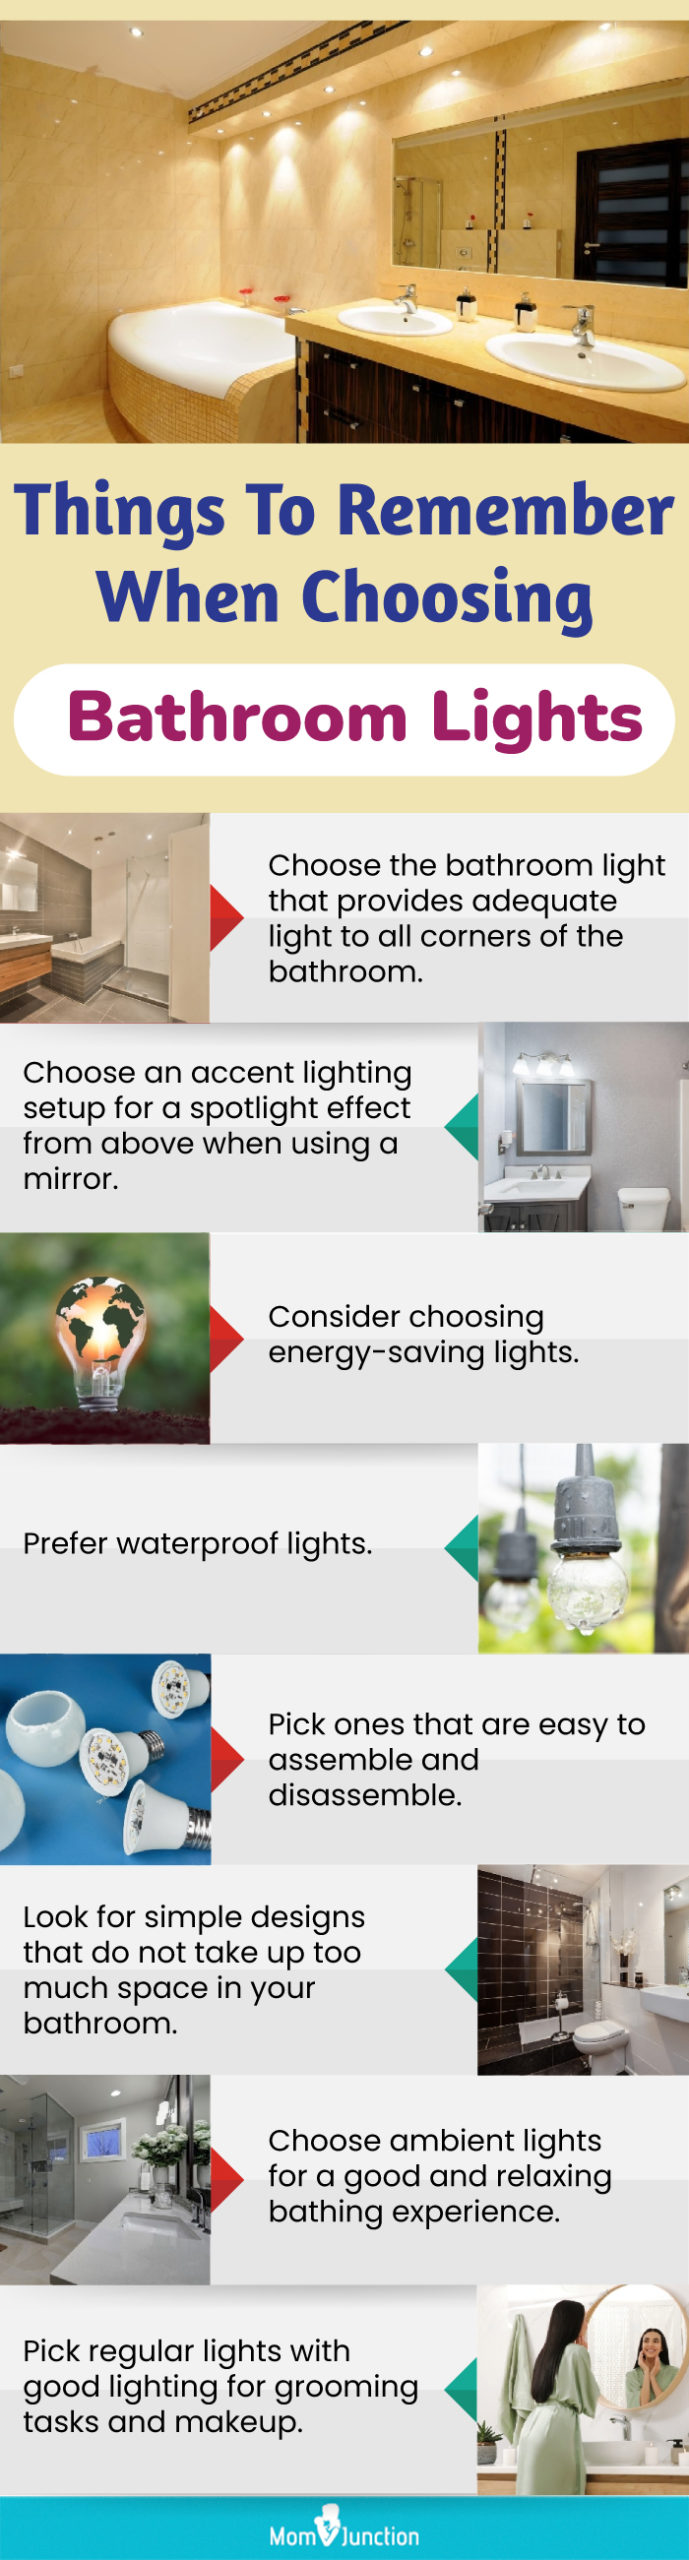 Things To Remember When Choosing Bathroom Lights (infographic)